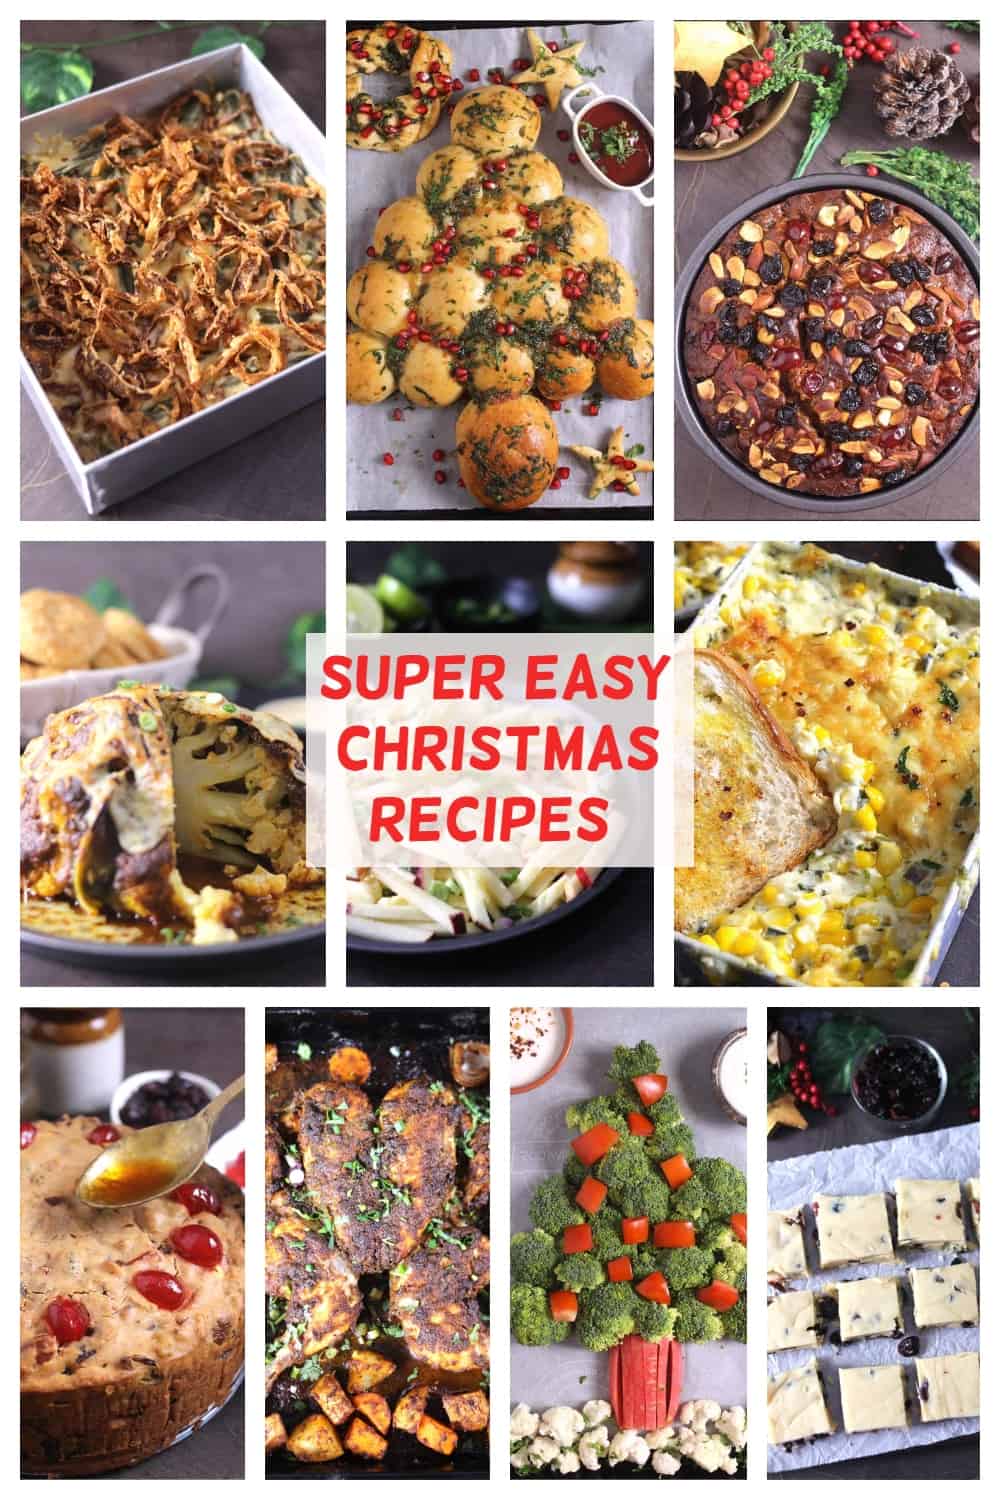 Christmas recipes, Christmas dinner food ideas and menu appetizers, casseroles, bread, main dishes